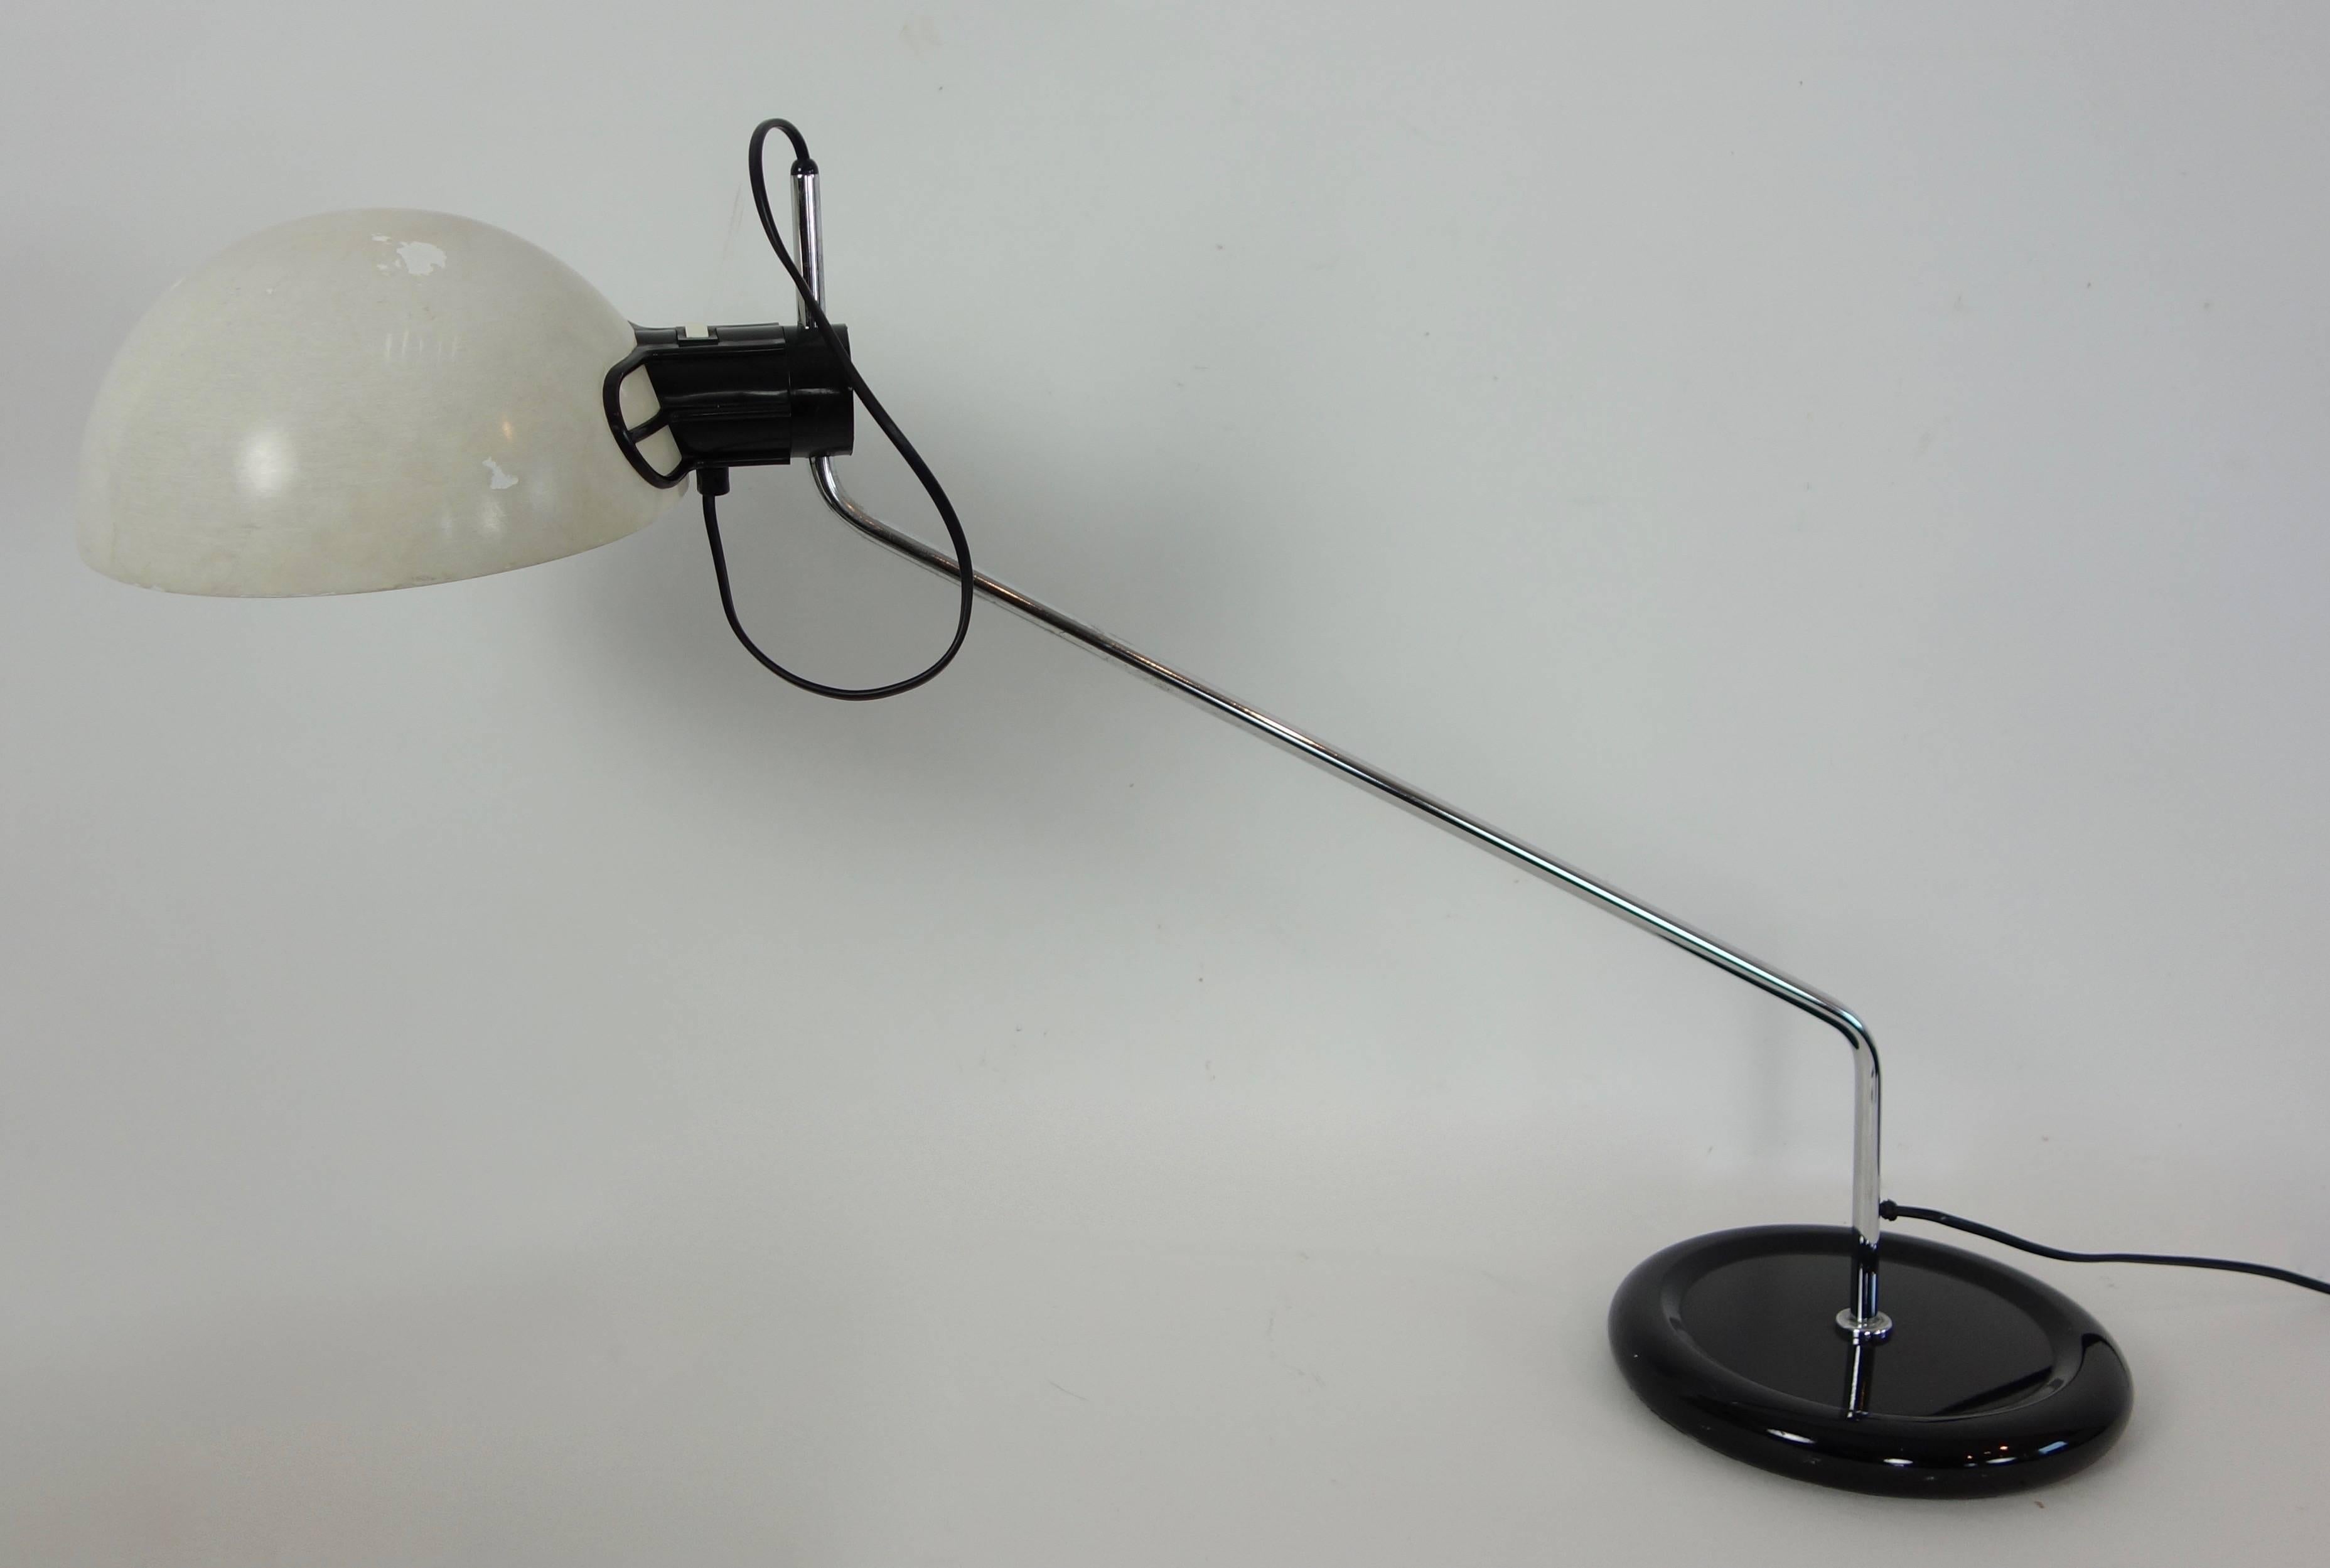 This is a midcentury articulating desk lamp with bakelite shade and black enameled steel base. The chrome arm of the lamp swivels and the bakelite shade also articulates.